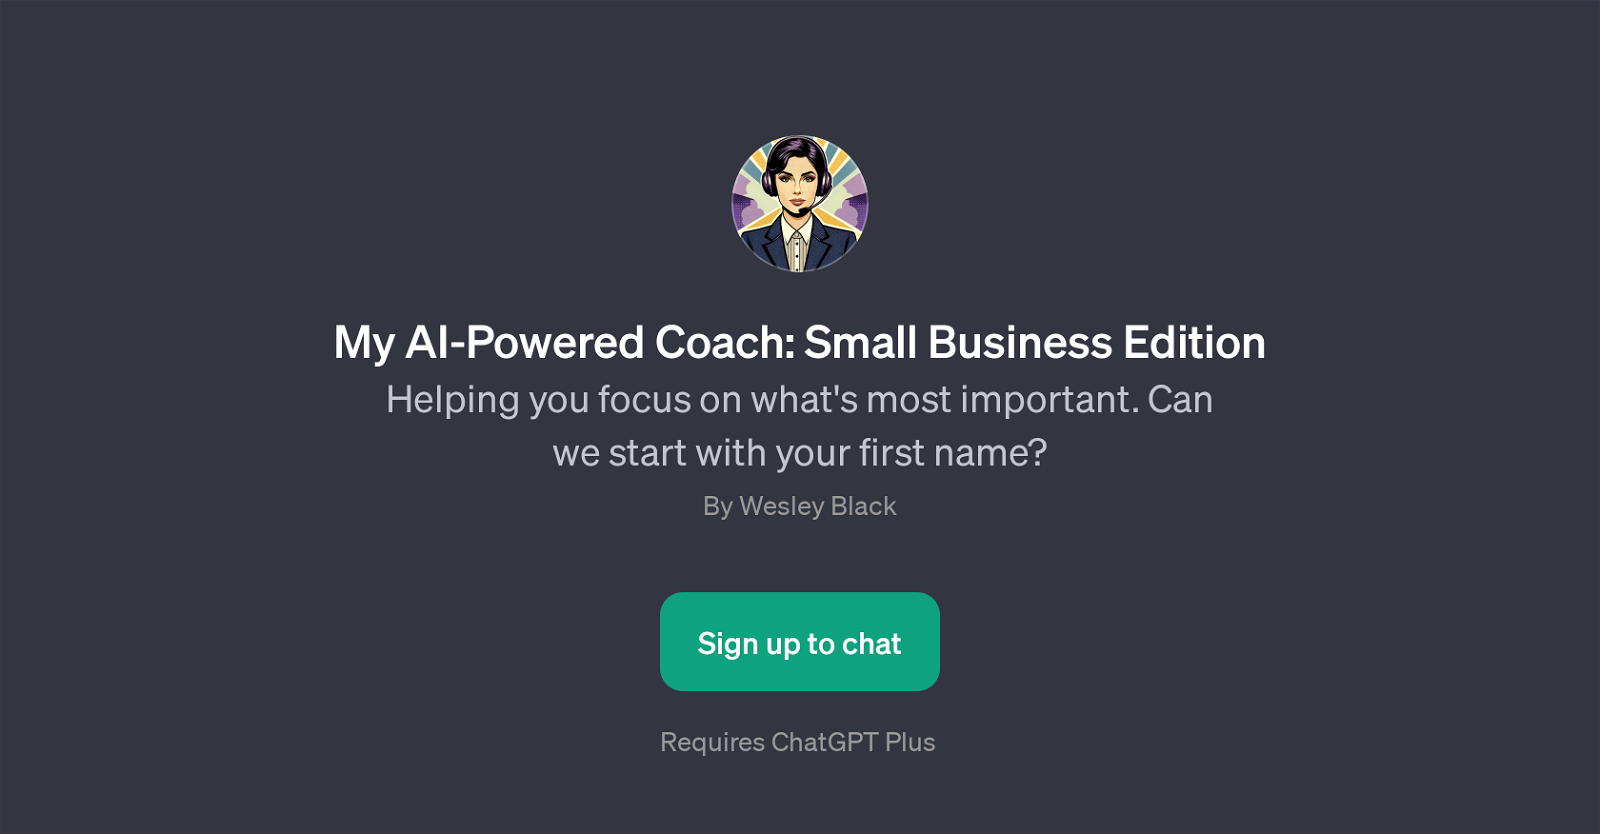 My AI-Powered Coach: Small Business Edition website